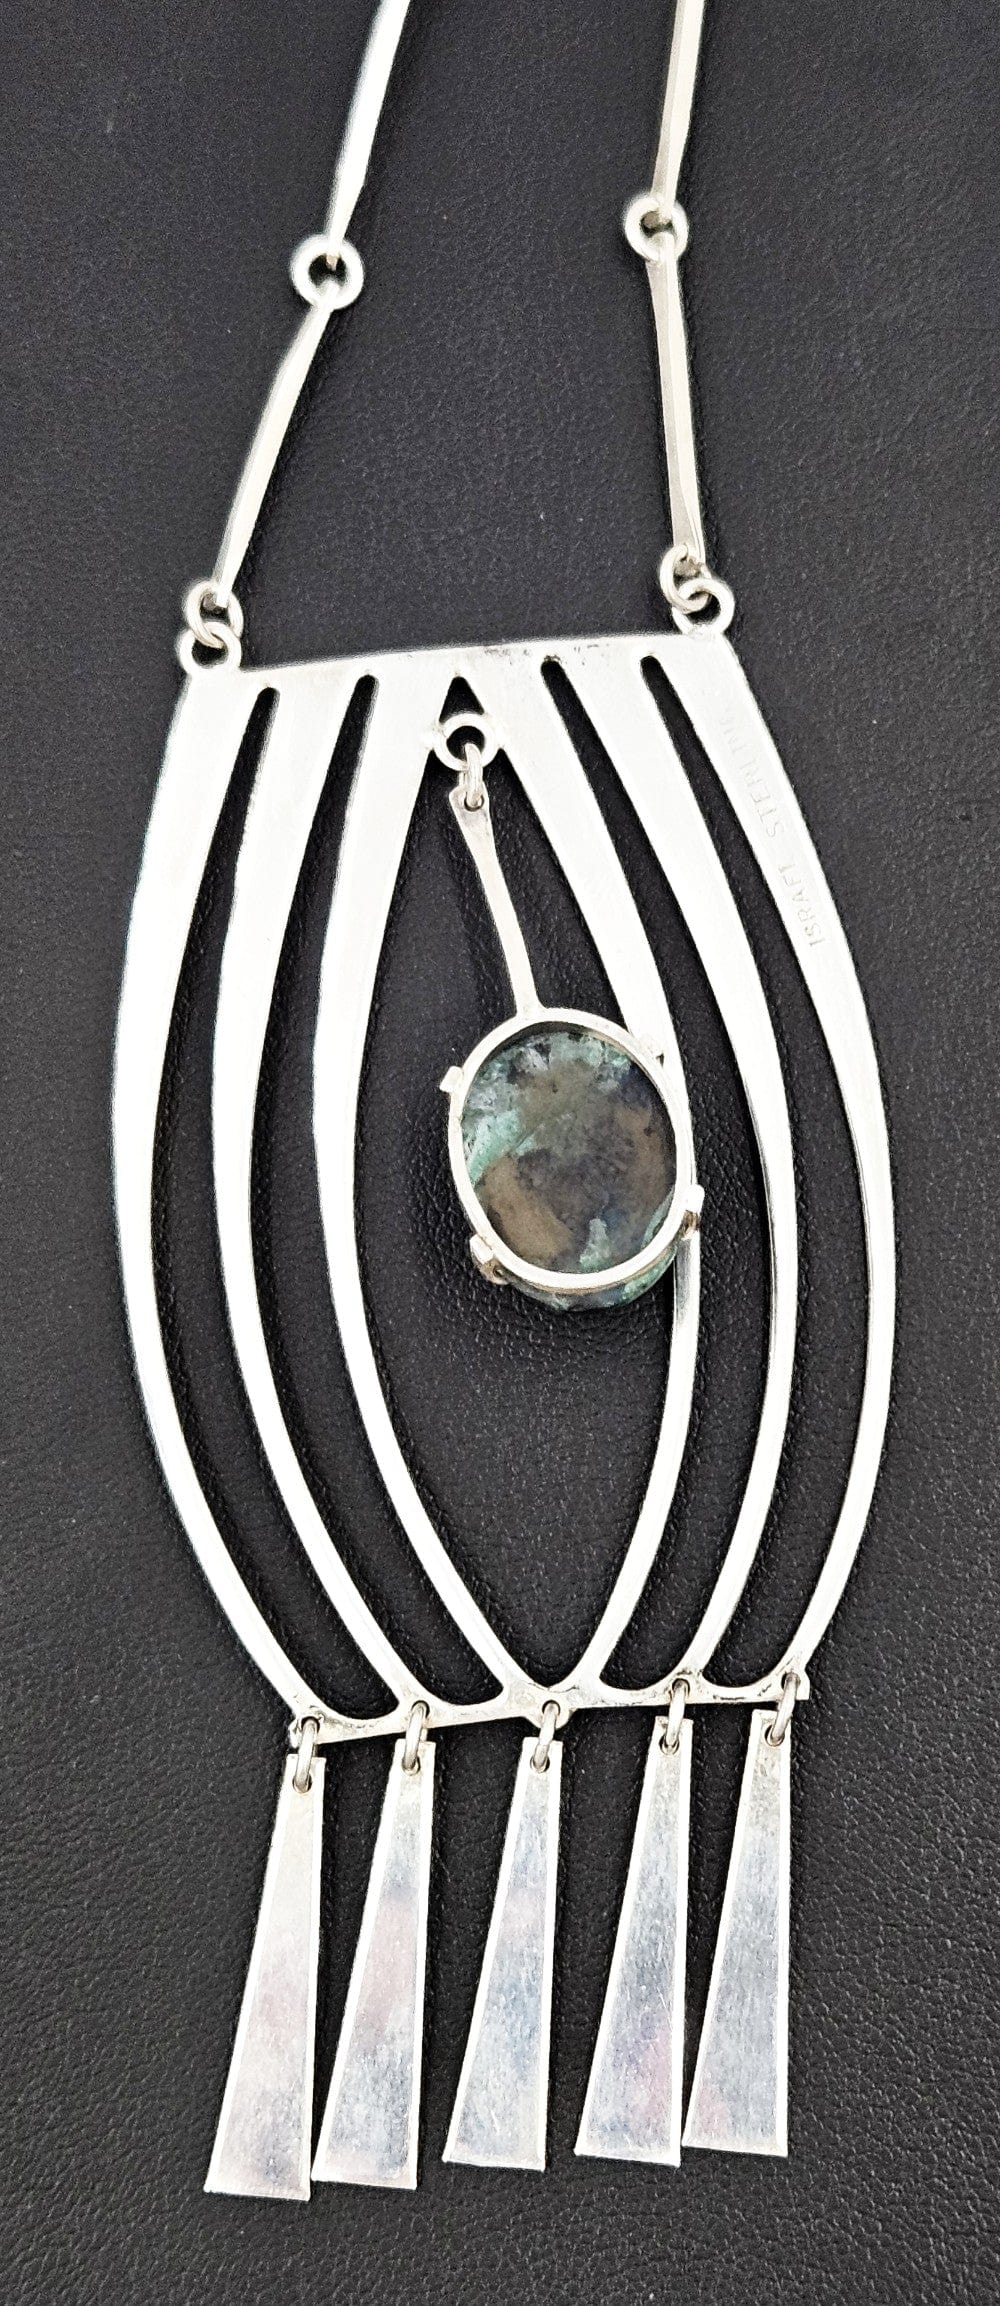 Israel Sterling Jewelry Designer Israel 935 Sterling Abstract Modernist Pendant Necklace 1960's